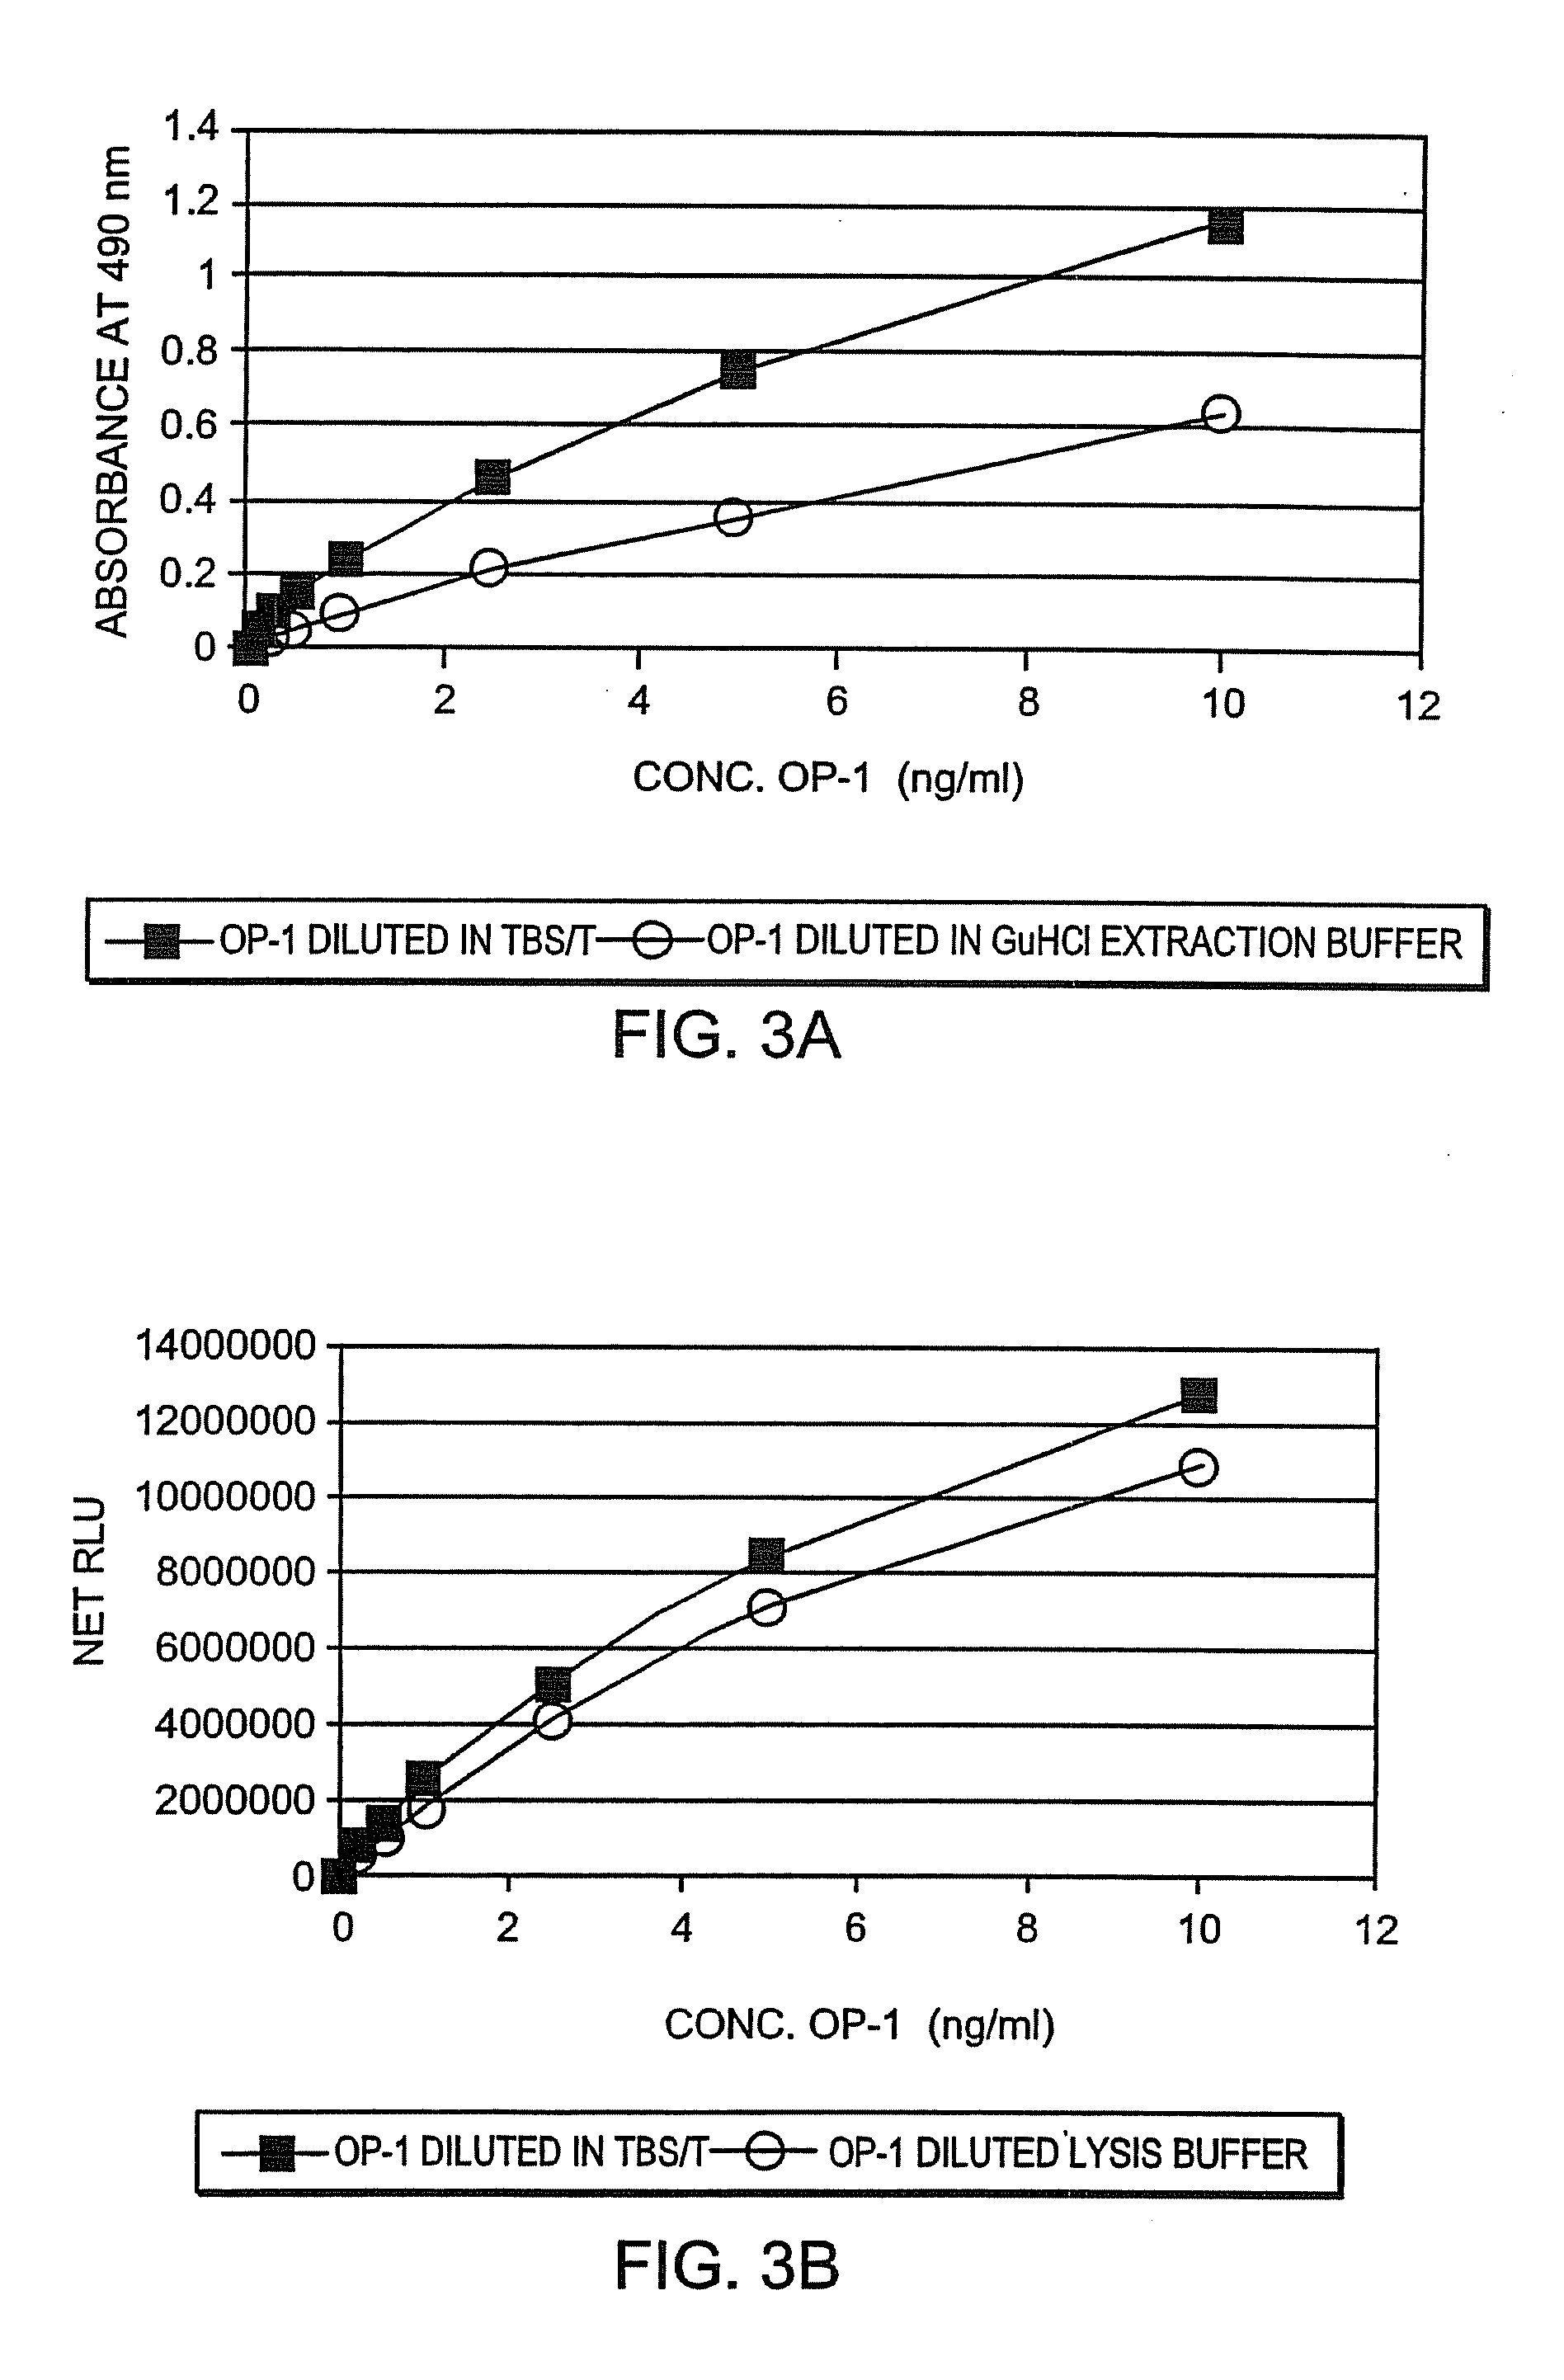 Methods of Using Bone Morphogenic Proteins as Biomarkers for Determining Cartilage Degeneration and Aging